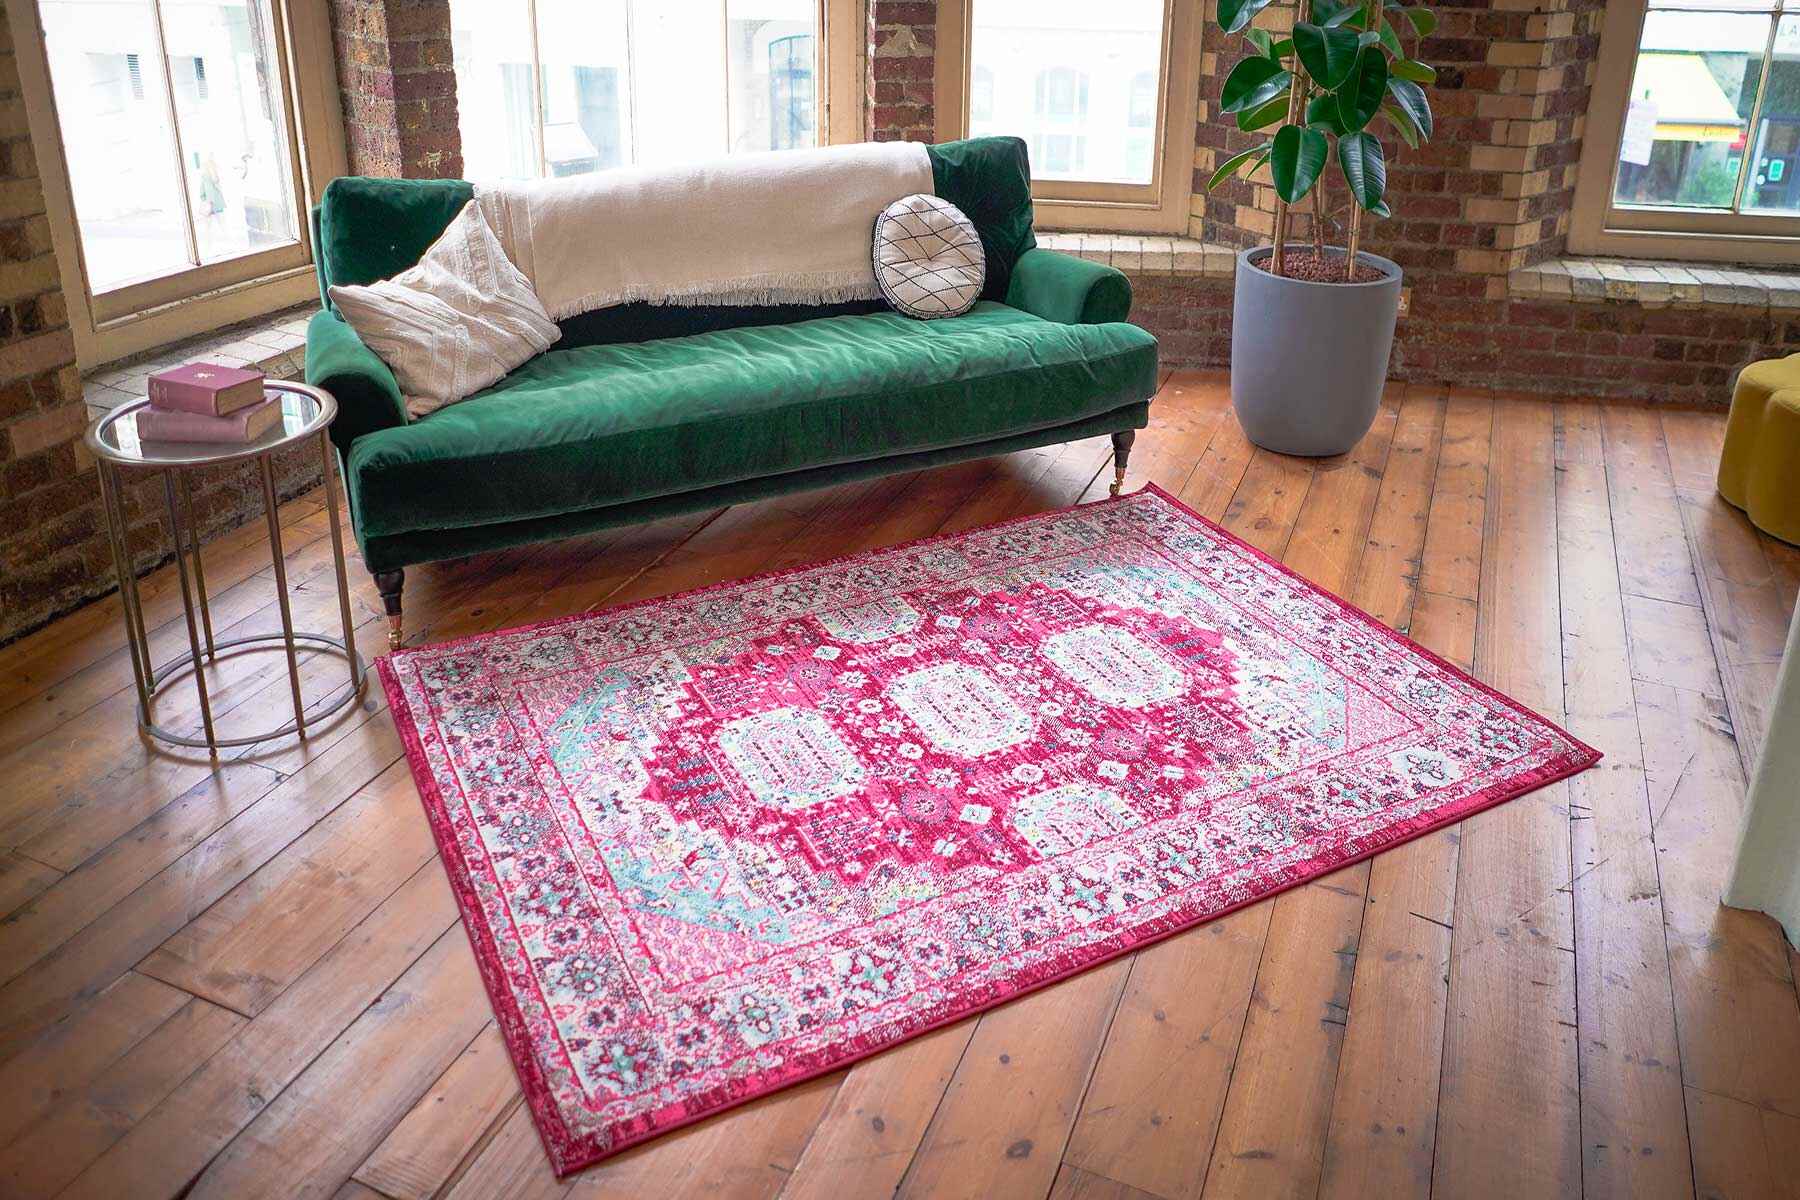 Key Considerations for Finding Your Washable Rug